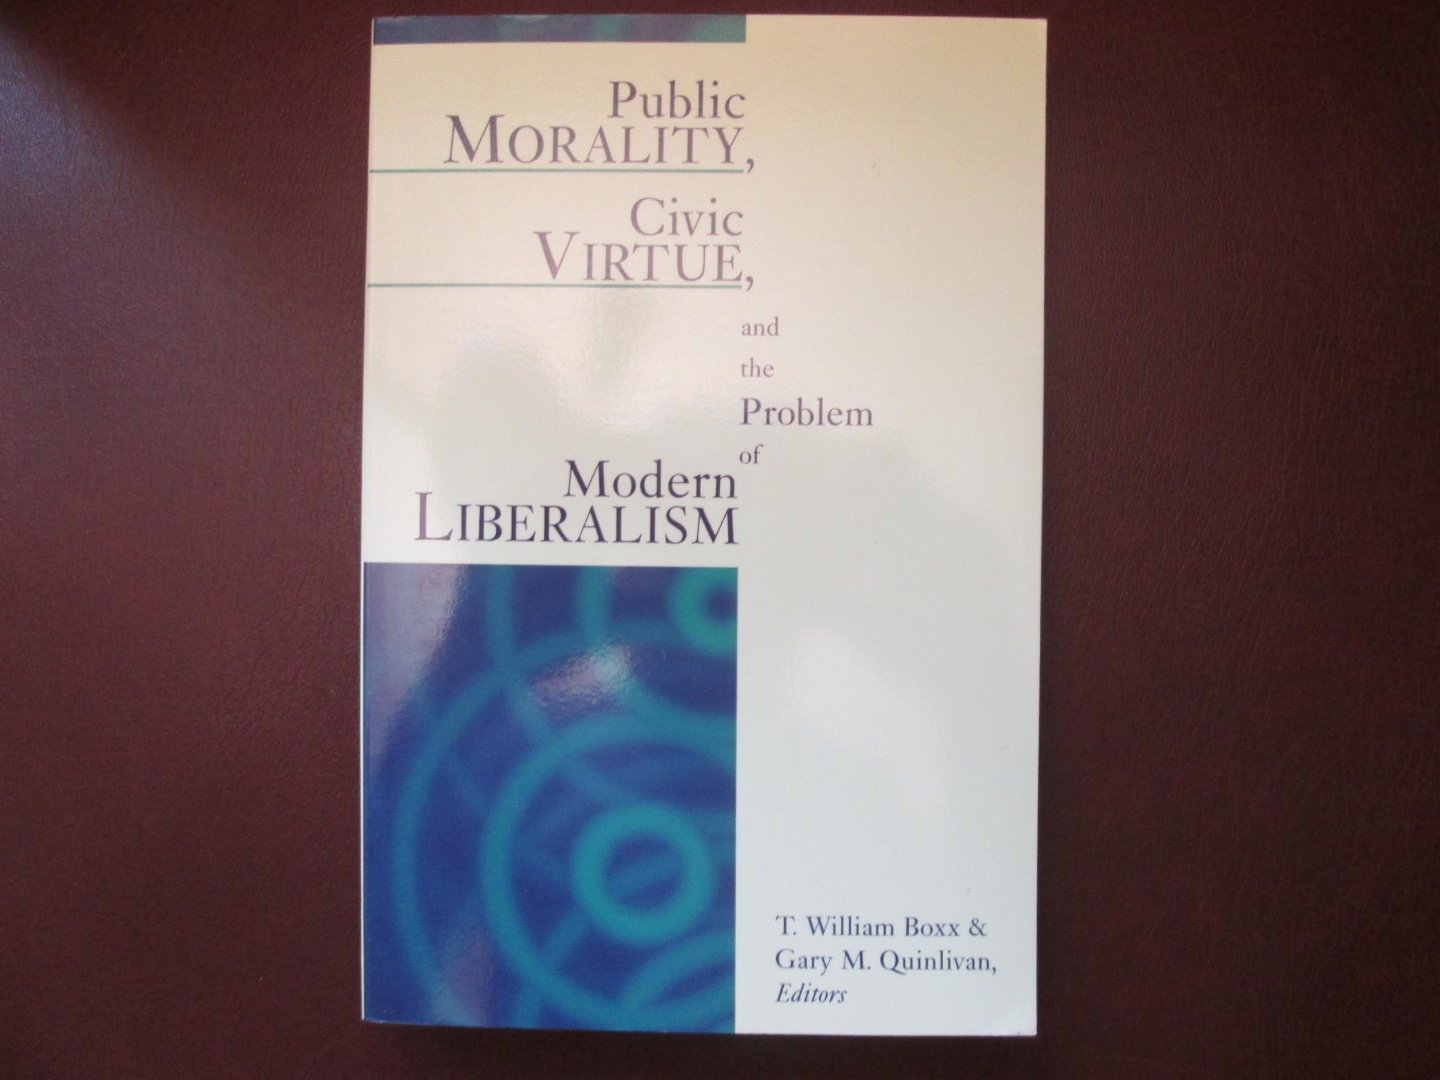 Boxx , T. William & Gary M. Quinlivan ( eds.) - PUBLIC MORALITY , CIVIC VIRTUE , AND THE PROBLEM OF MODERN LIBERALISM